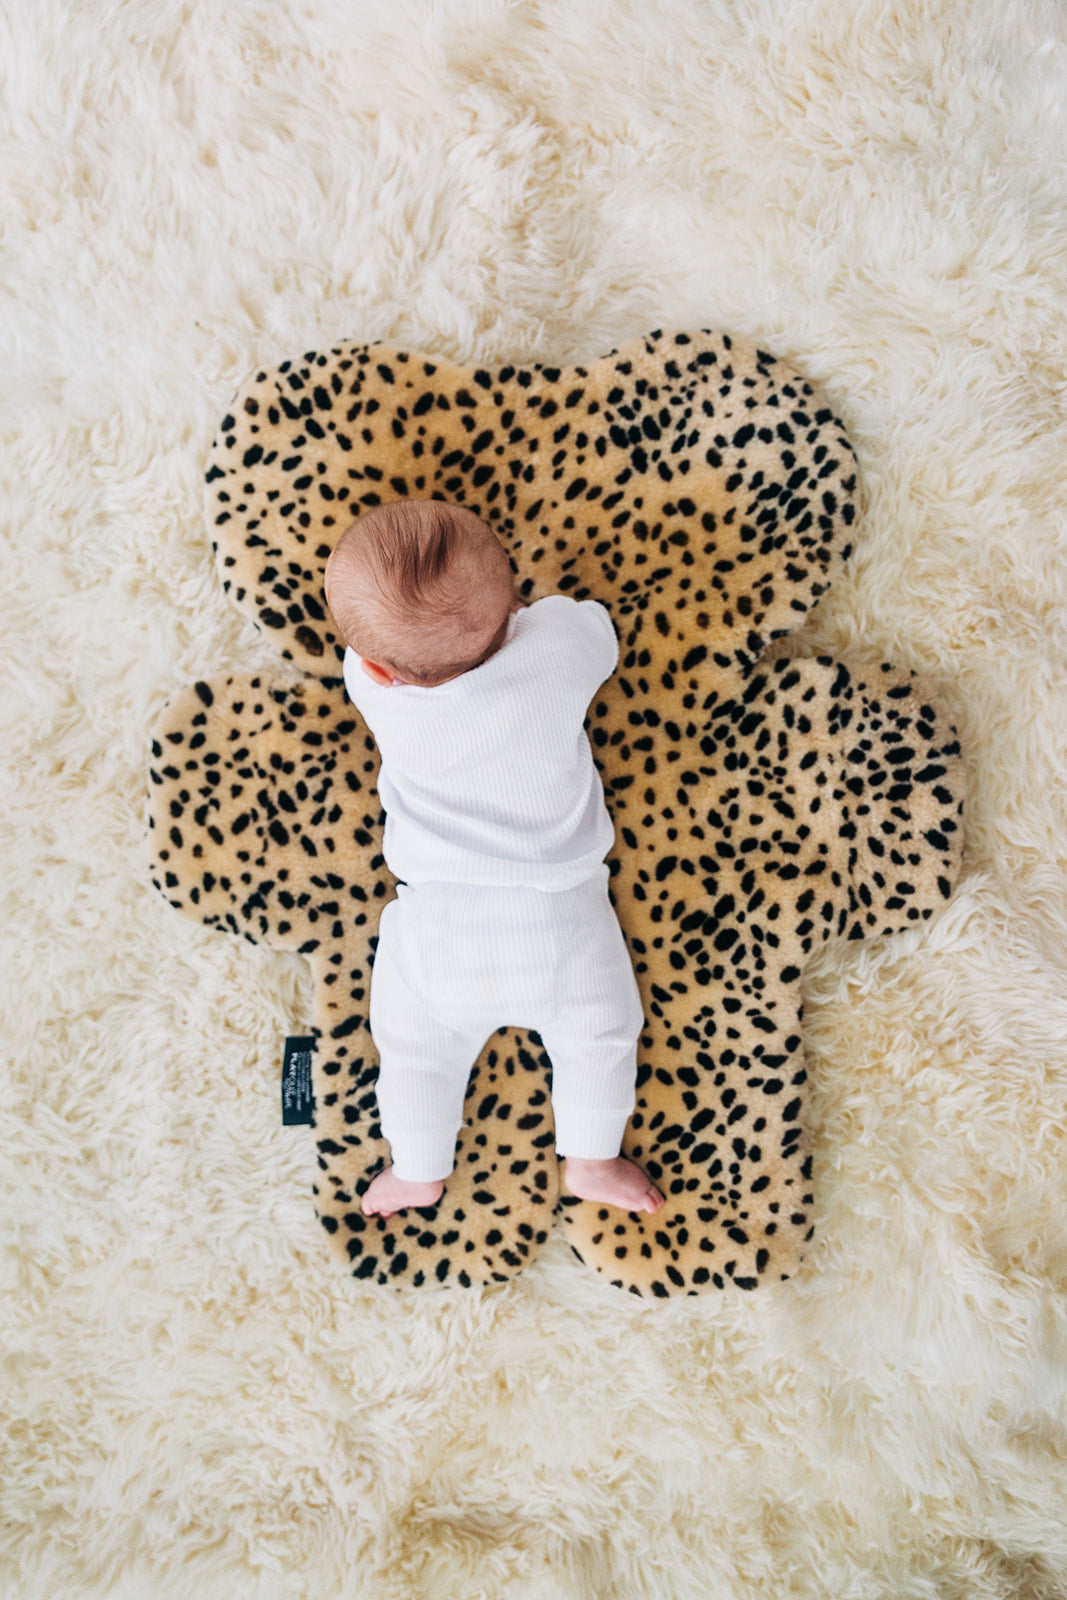 Leopard print sheepskin nursery rug with baby laying on top for tummy time and playtime